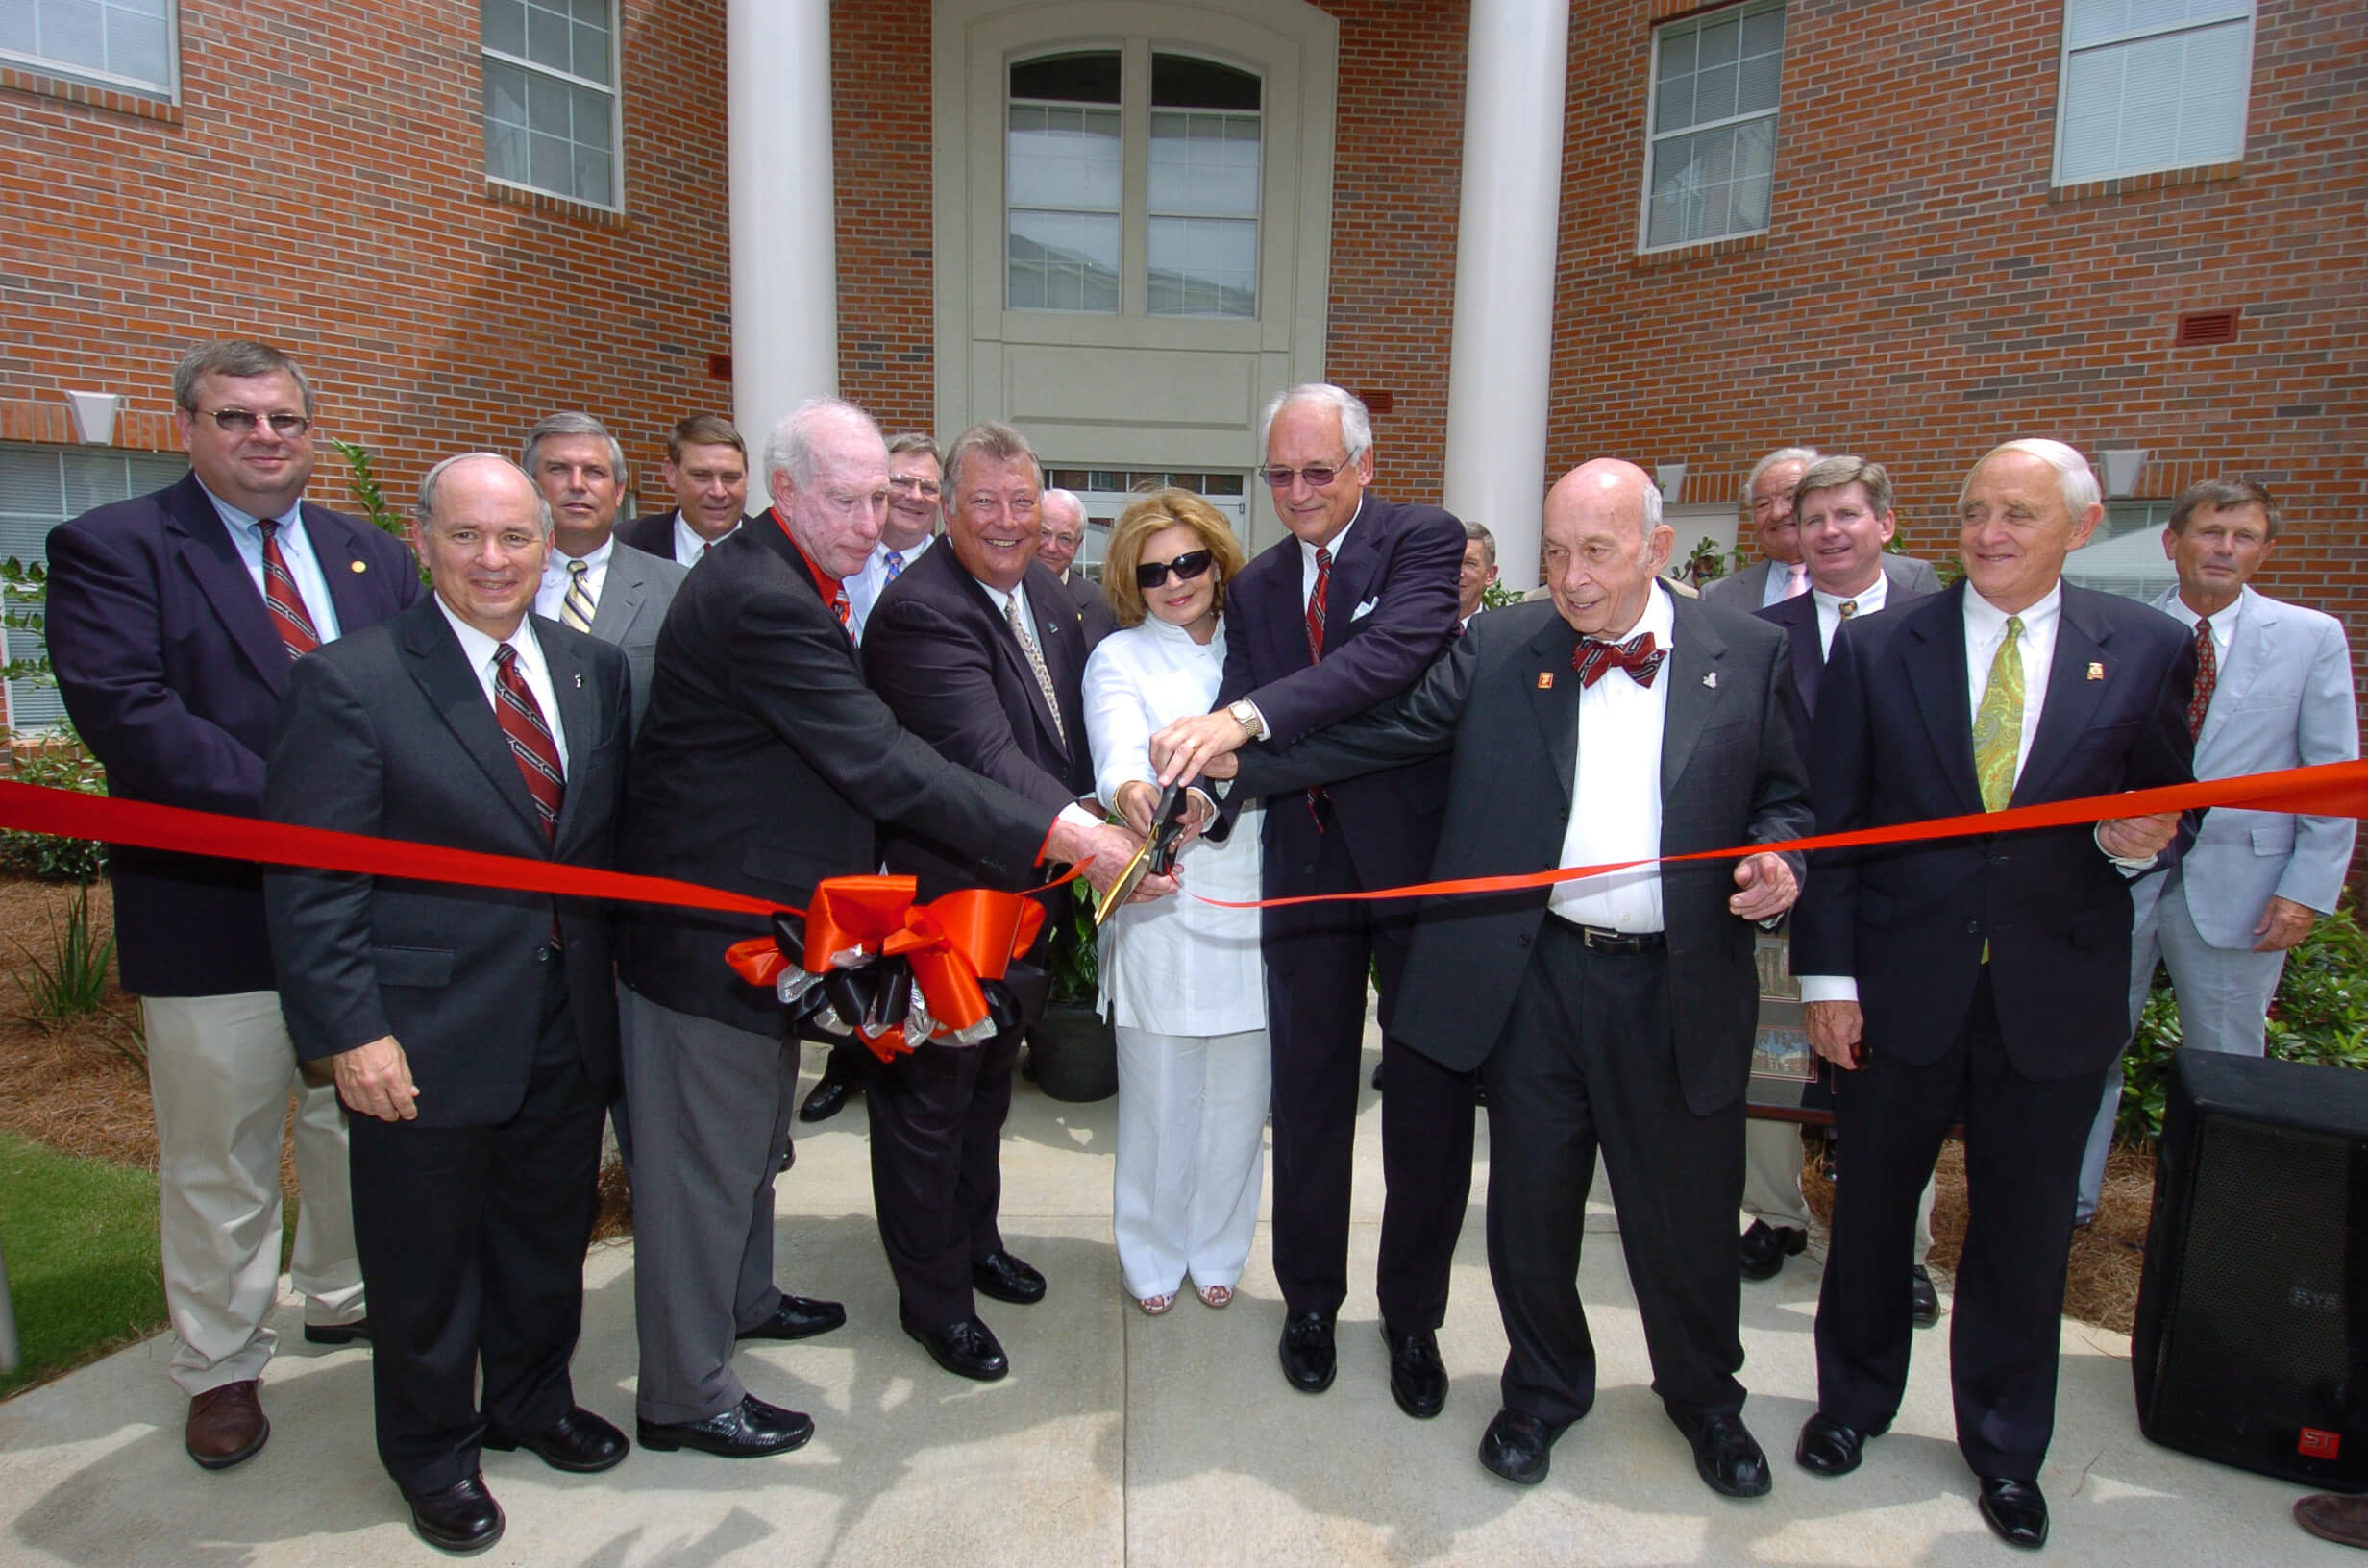 The Chancellor and First Lady are joined by Trustees and other dignitaries to officially open Trojan Village, the University’s four-complex, apartment-style residence halls.